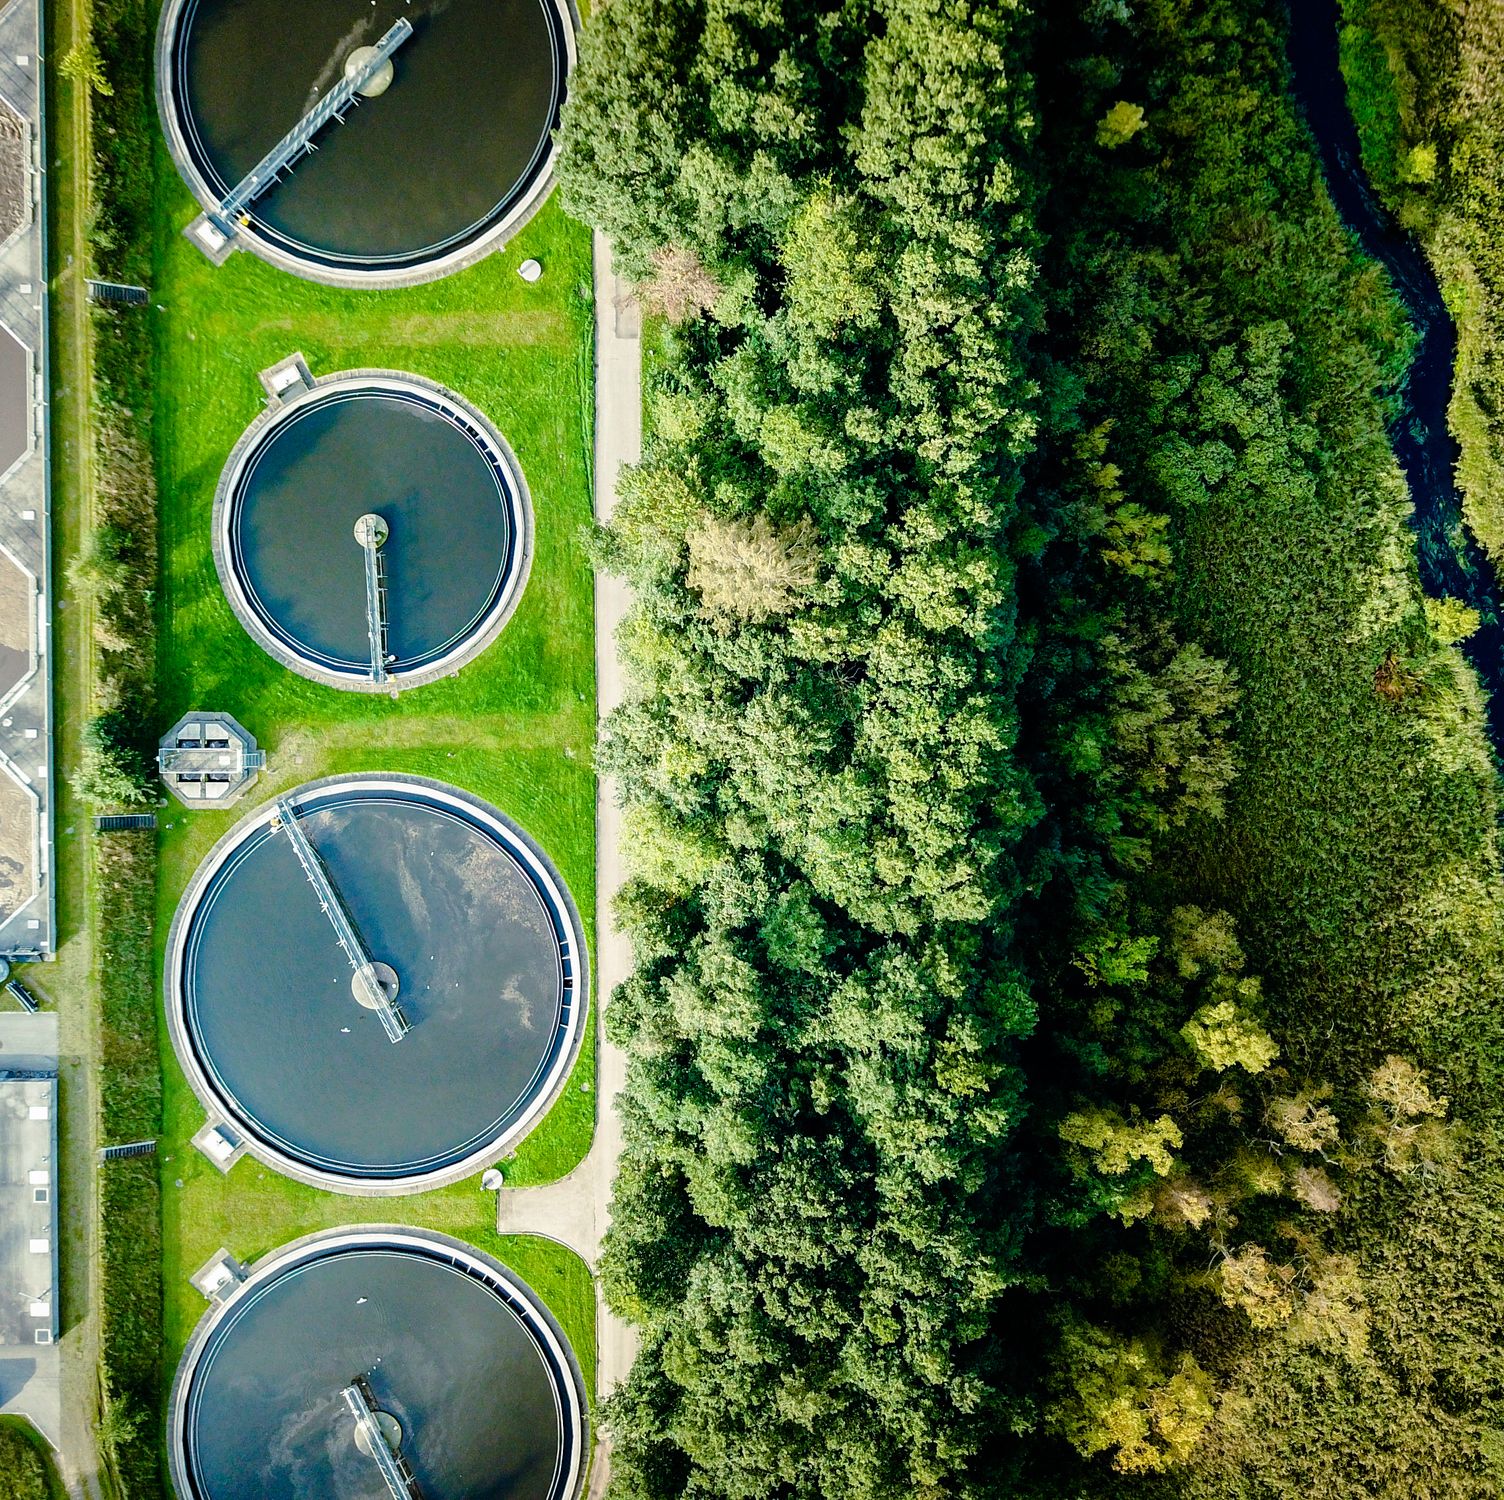 Everyday Explained: How Wastewater Treatment Plants Transform Sewage Into Safe Water